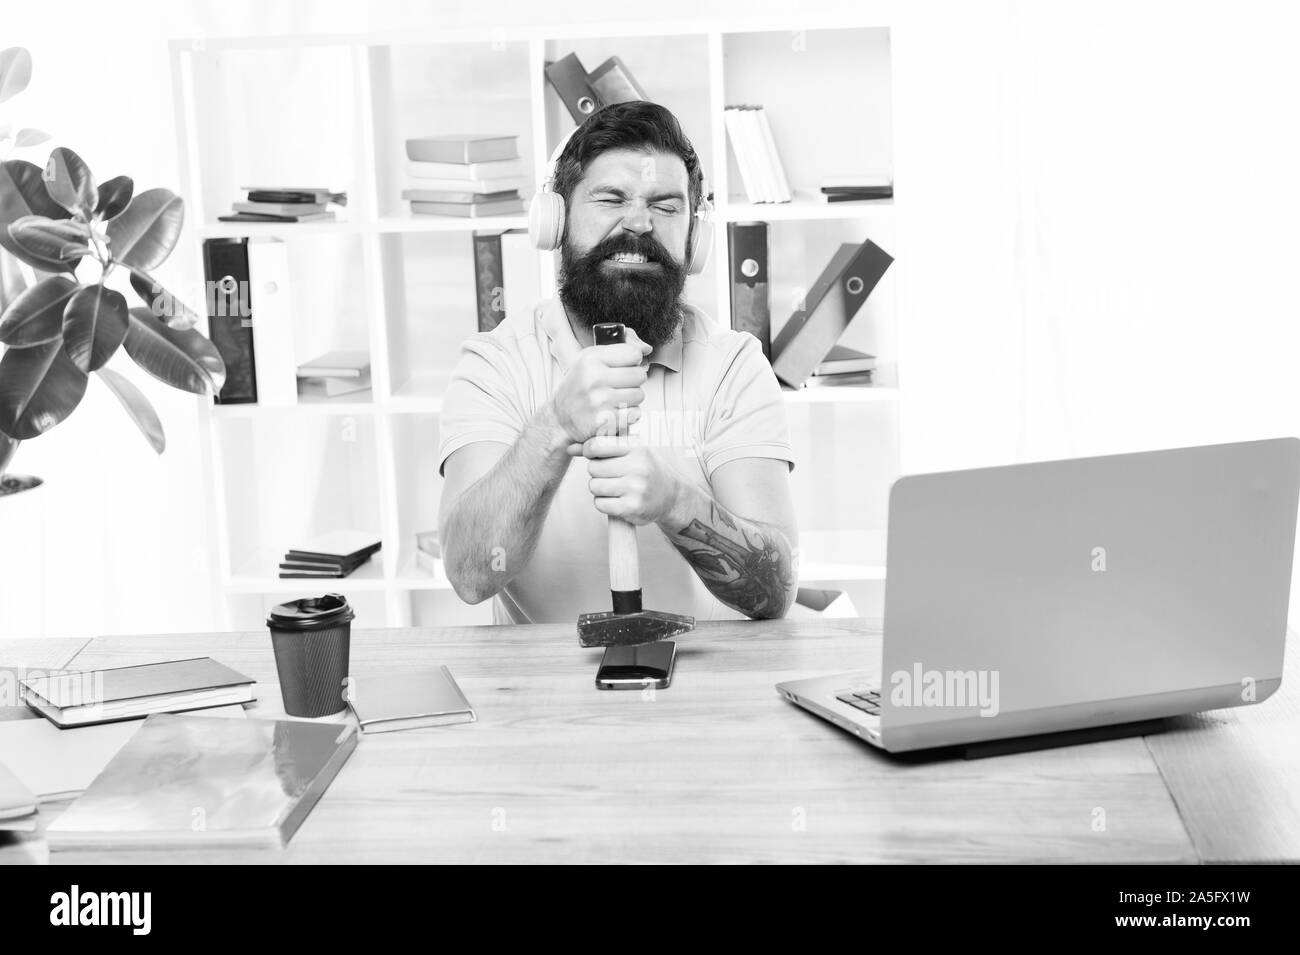 Spoiled communication. Failed mobile negotiations. Most annoying thing about work in call center. Incoming call. Stressful job at call center. Man bearded guy headphones office hammer smartphone. Stock Photo